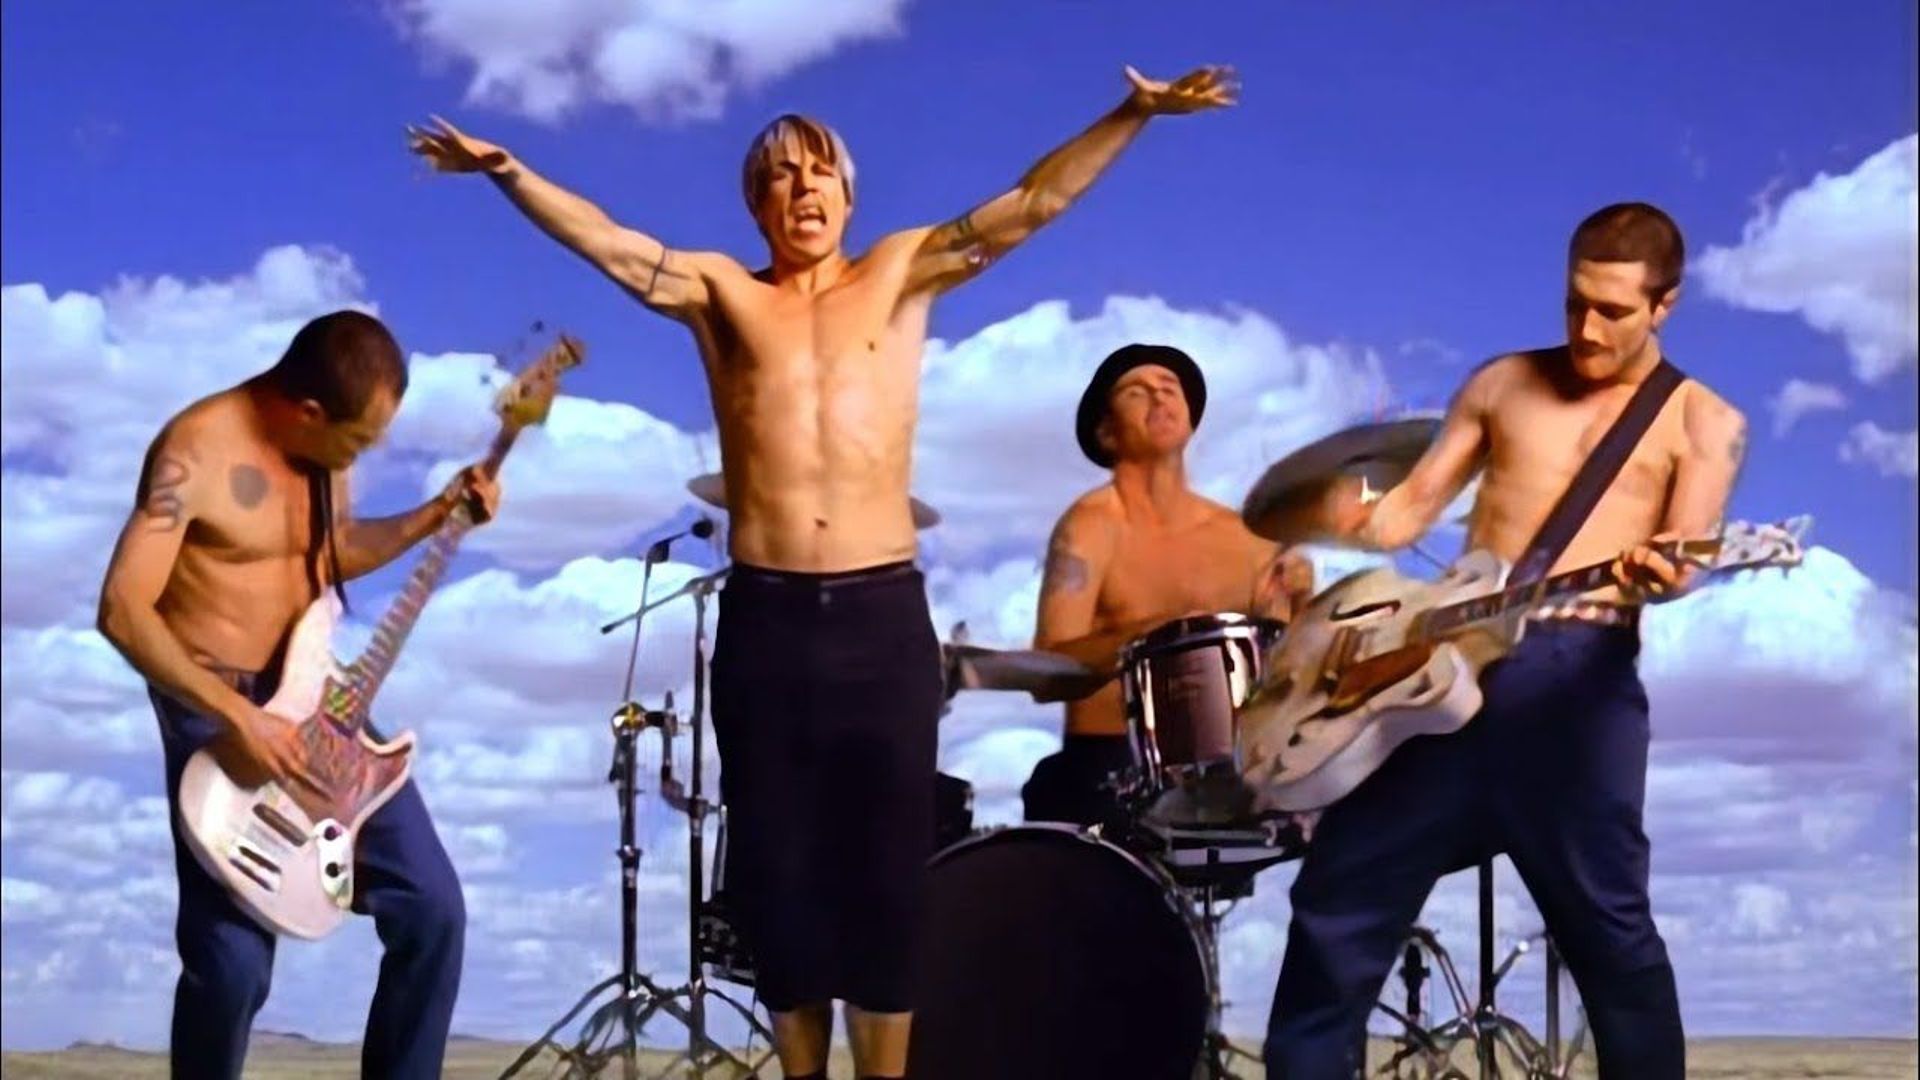 Red hot chili peppers клипы. RHCP 1999. Red hot Chili Peppers 1999. Red hot Chili Peppers Californication клип. RHCP Californication обложка.